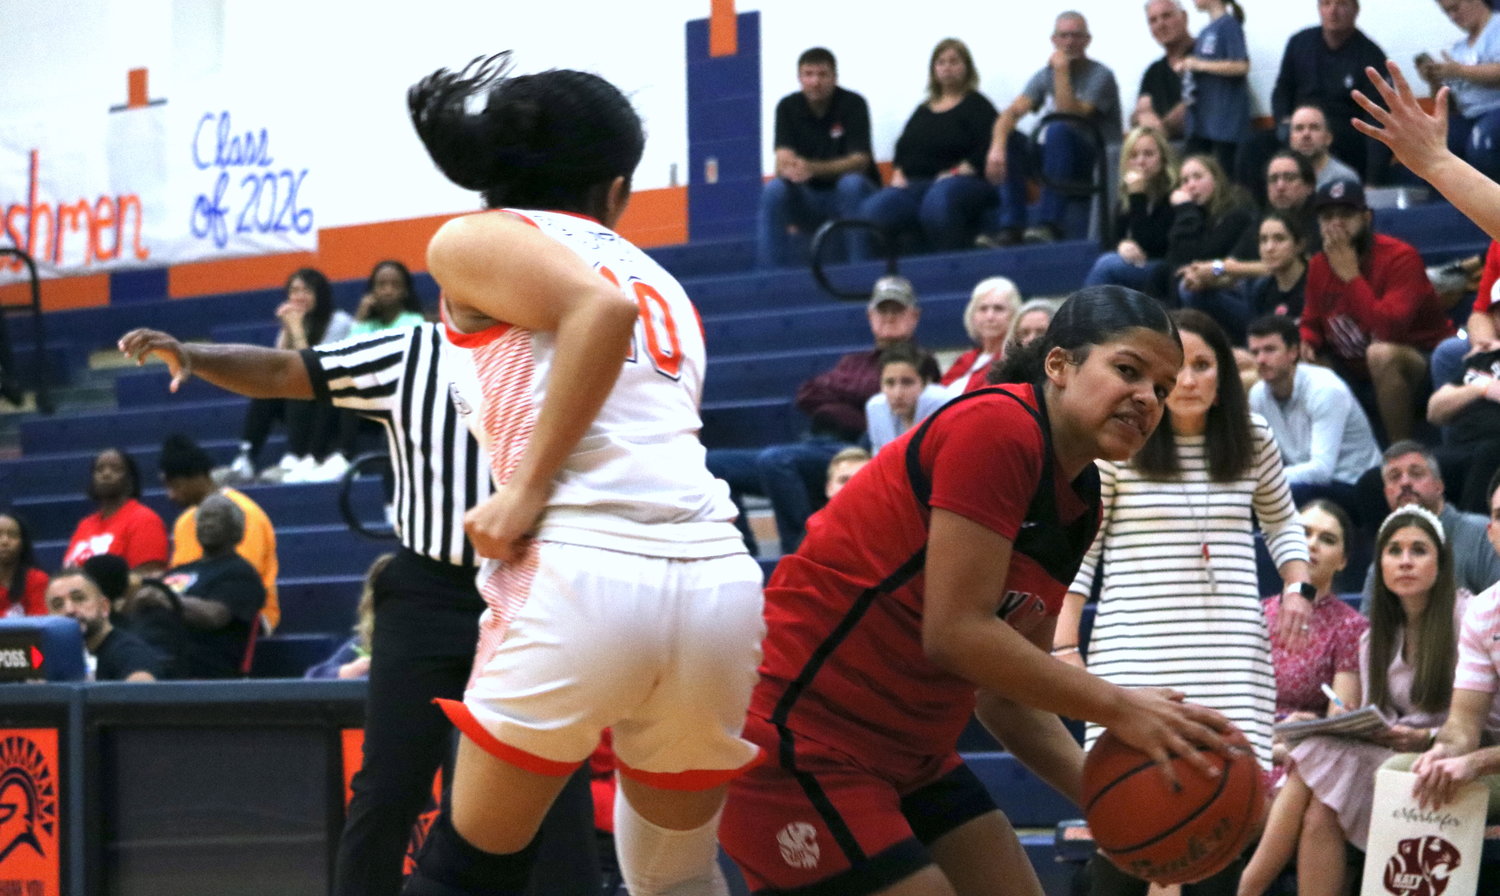 Ashlynn Alexander drives past a defender during Tuesday's game between Katy and Seven Lakes at the Seven Lakes gym.